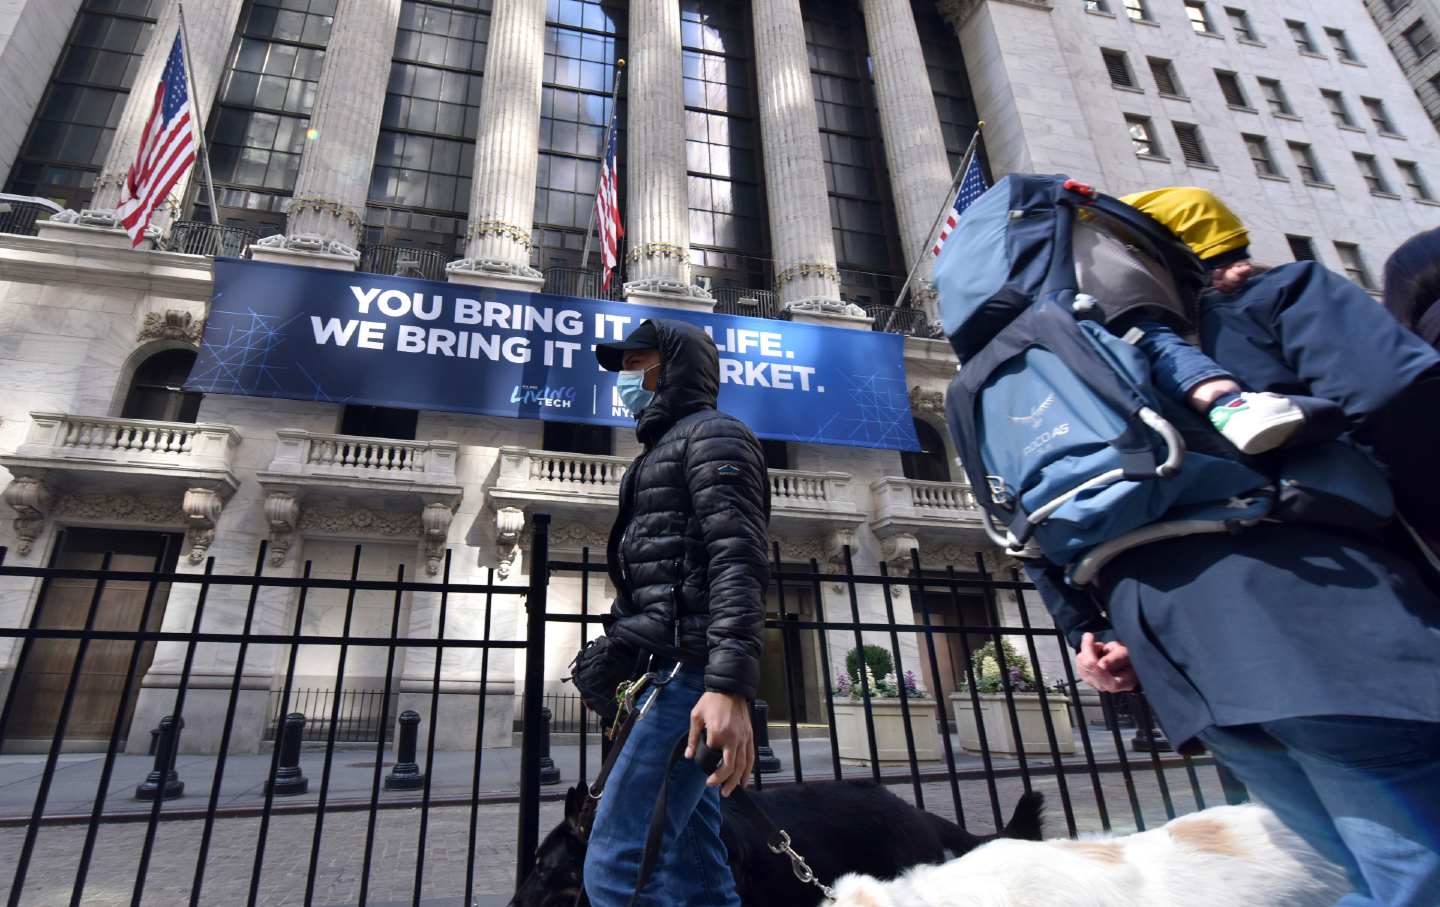 A man wearing a protective mask and passing in front of the New York Stock Exchange, walking his dog.